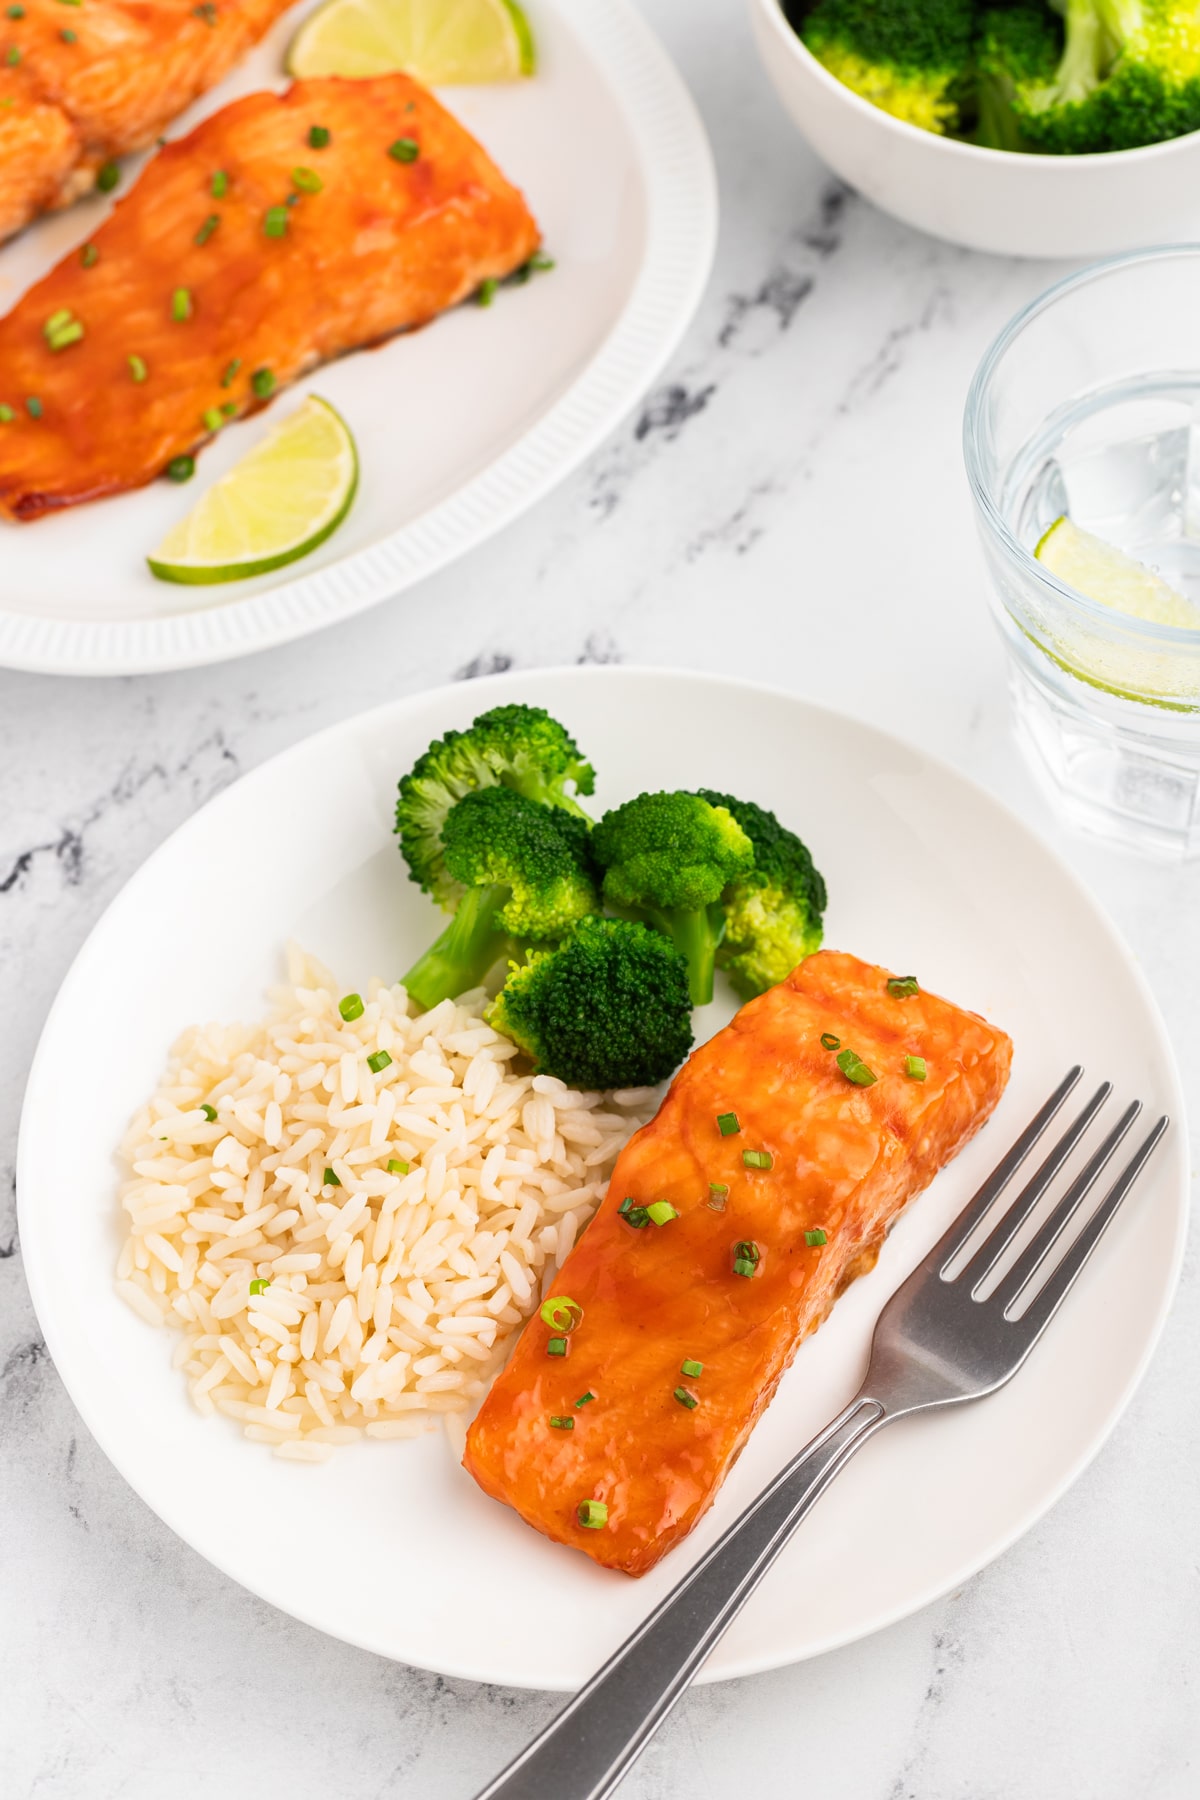 Honey Glazed Salmon with veggies and rice on a plate